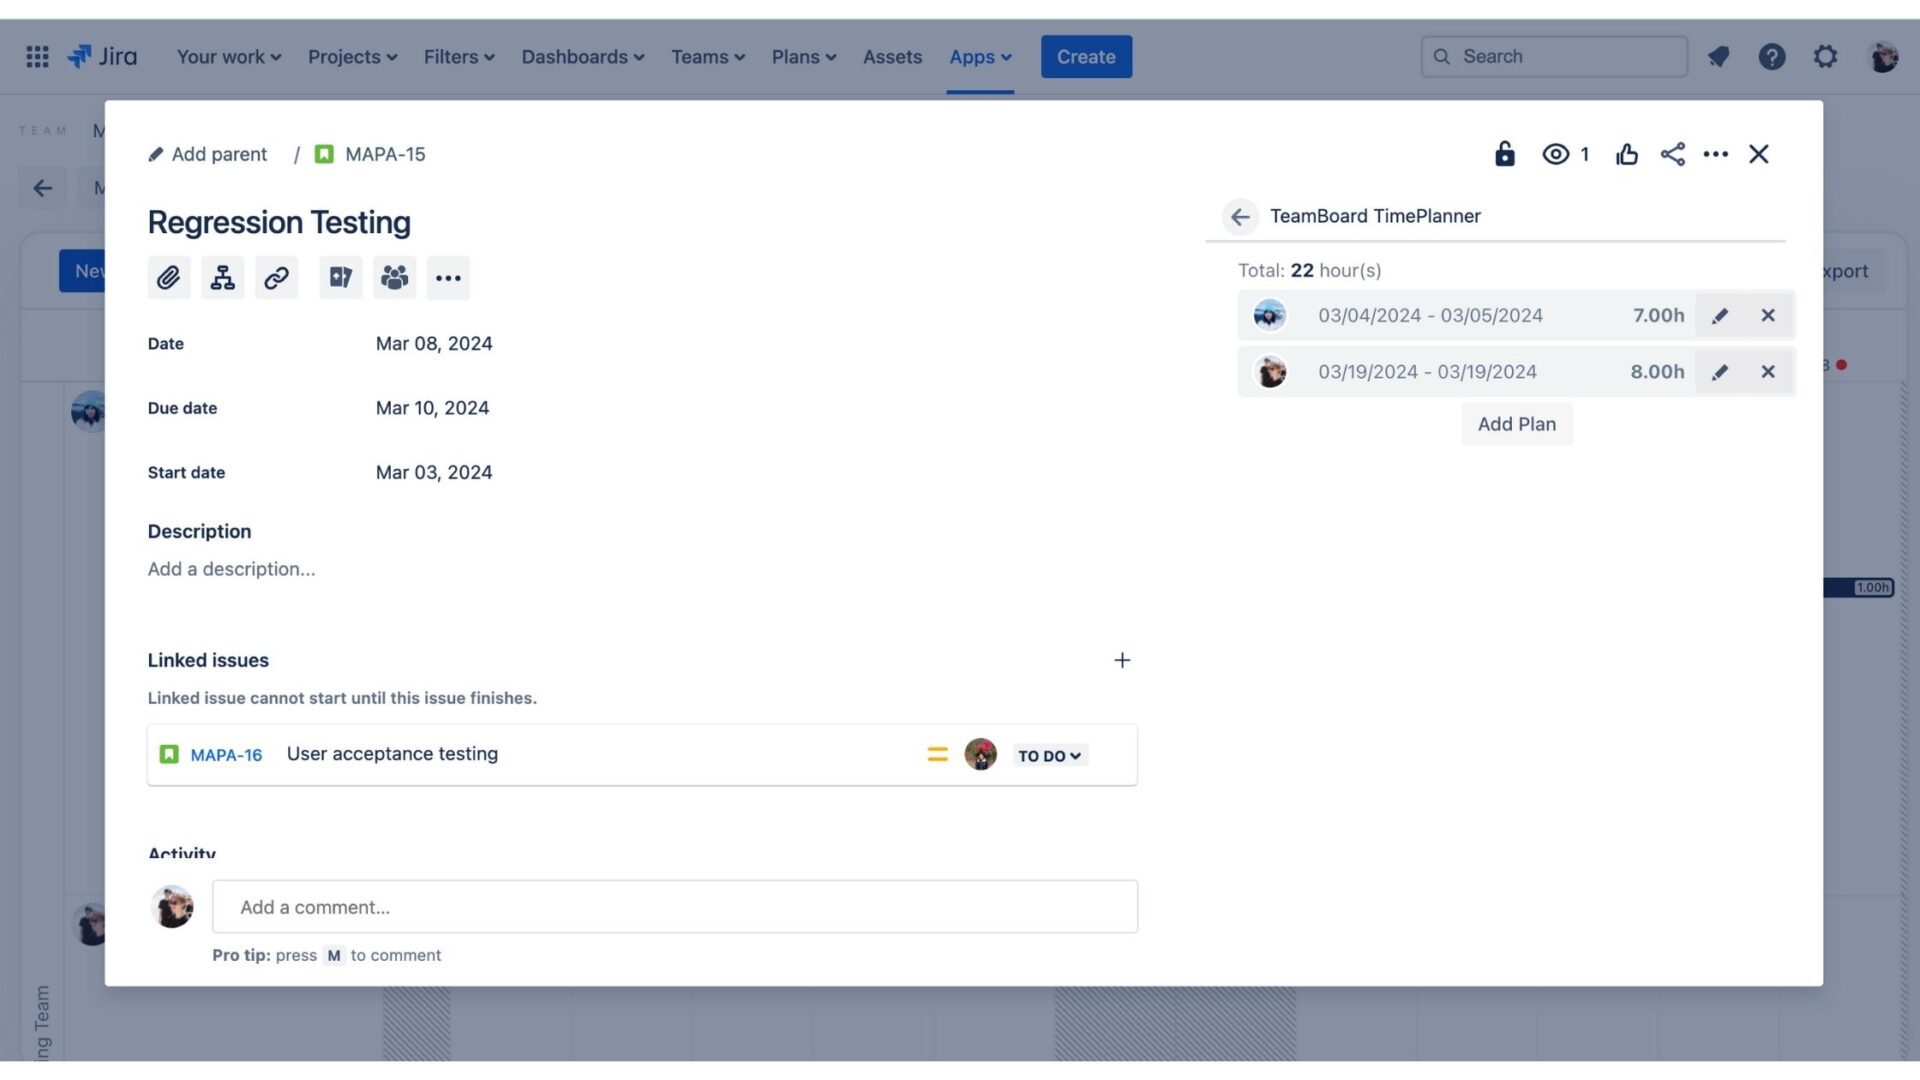 TimePlanner integrates with Jira smoothly, creating an uninterrupted workflow